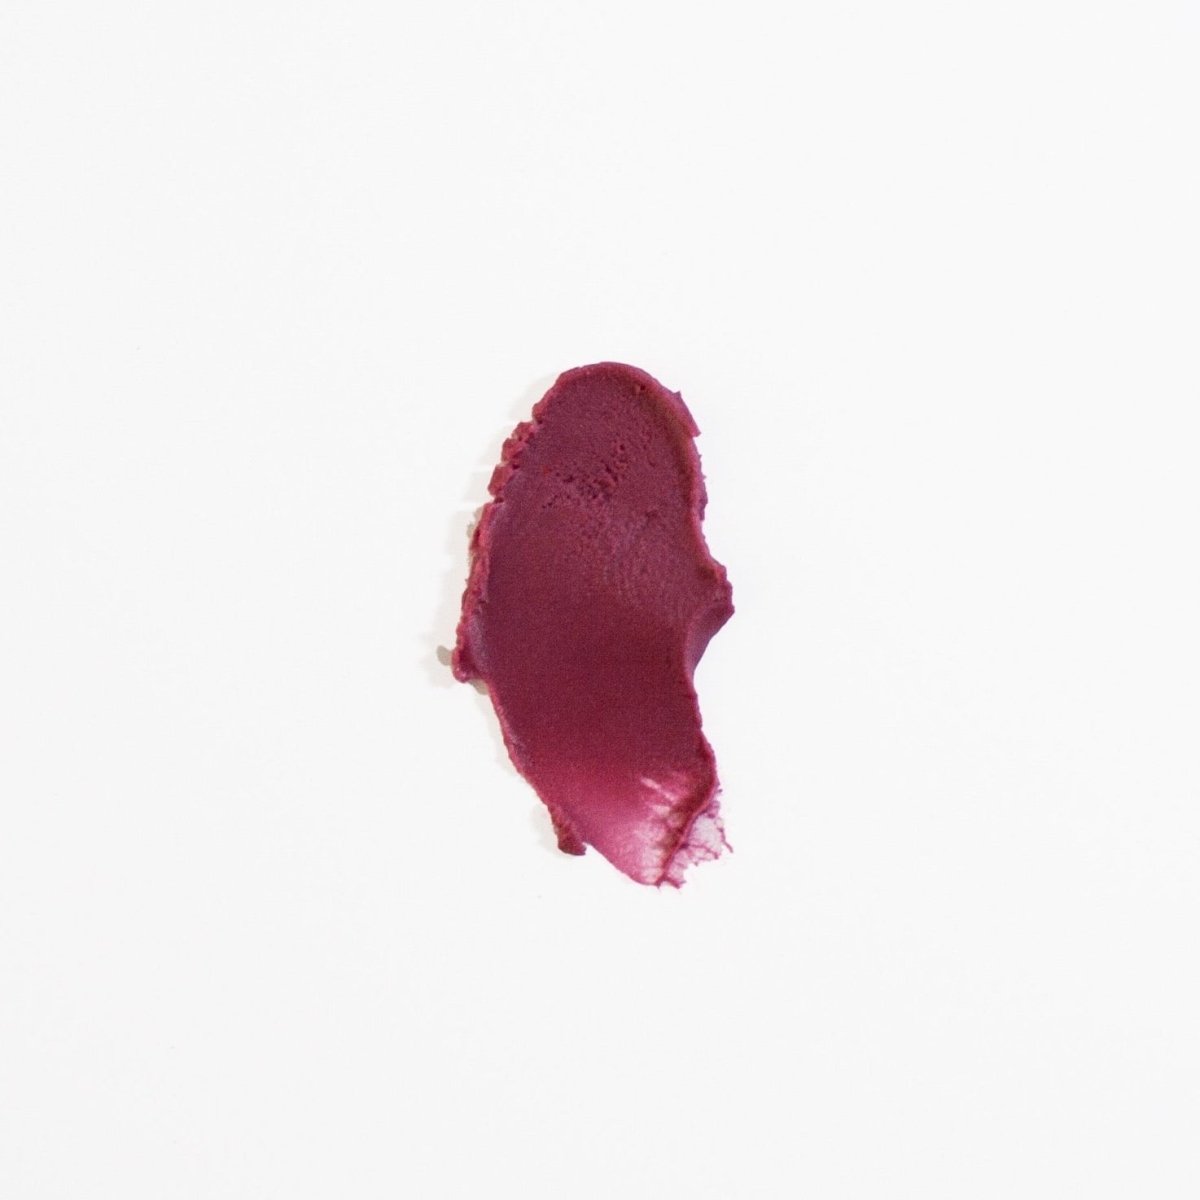 A magenta colored swatch of lip tint against a white background. The Lip Tint & Conditioner in Melrose is crafted by Aenons and made in Los Angeles, CA.